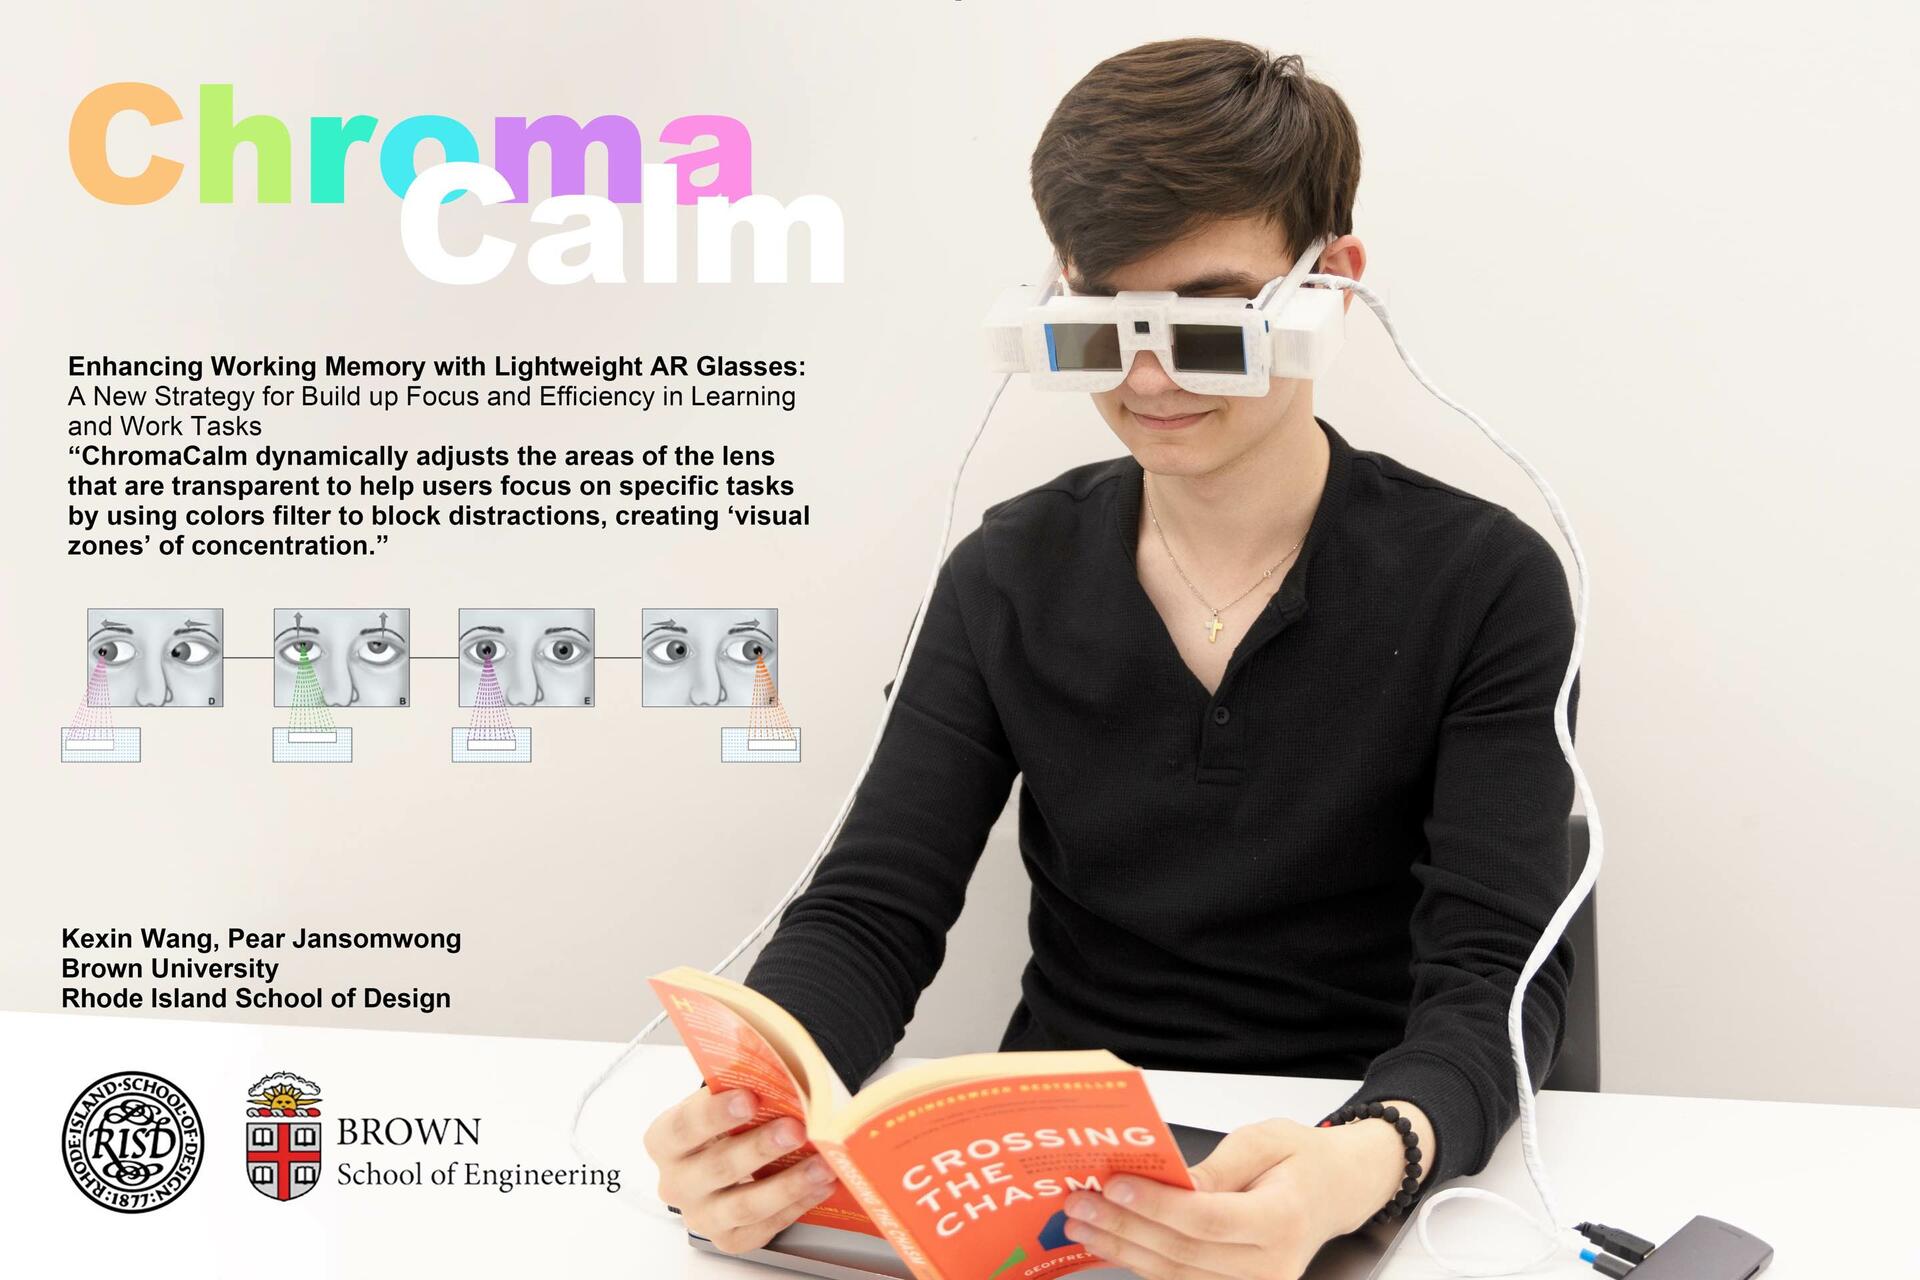 A person sits reading a book while wearing ChromaCalm AR glasses, which are equipped with adjustable transparent lenses to aid concentration.